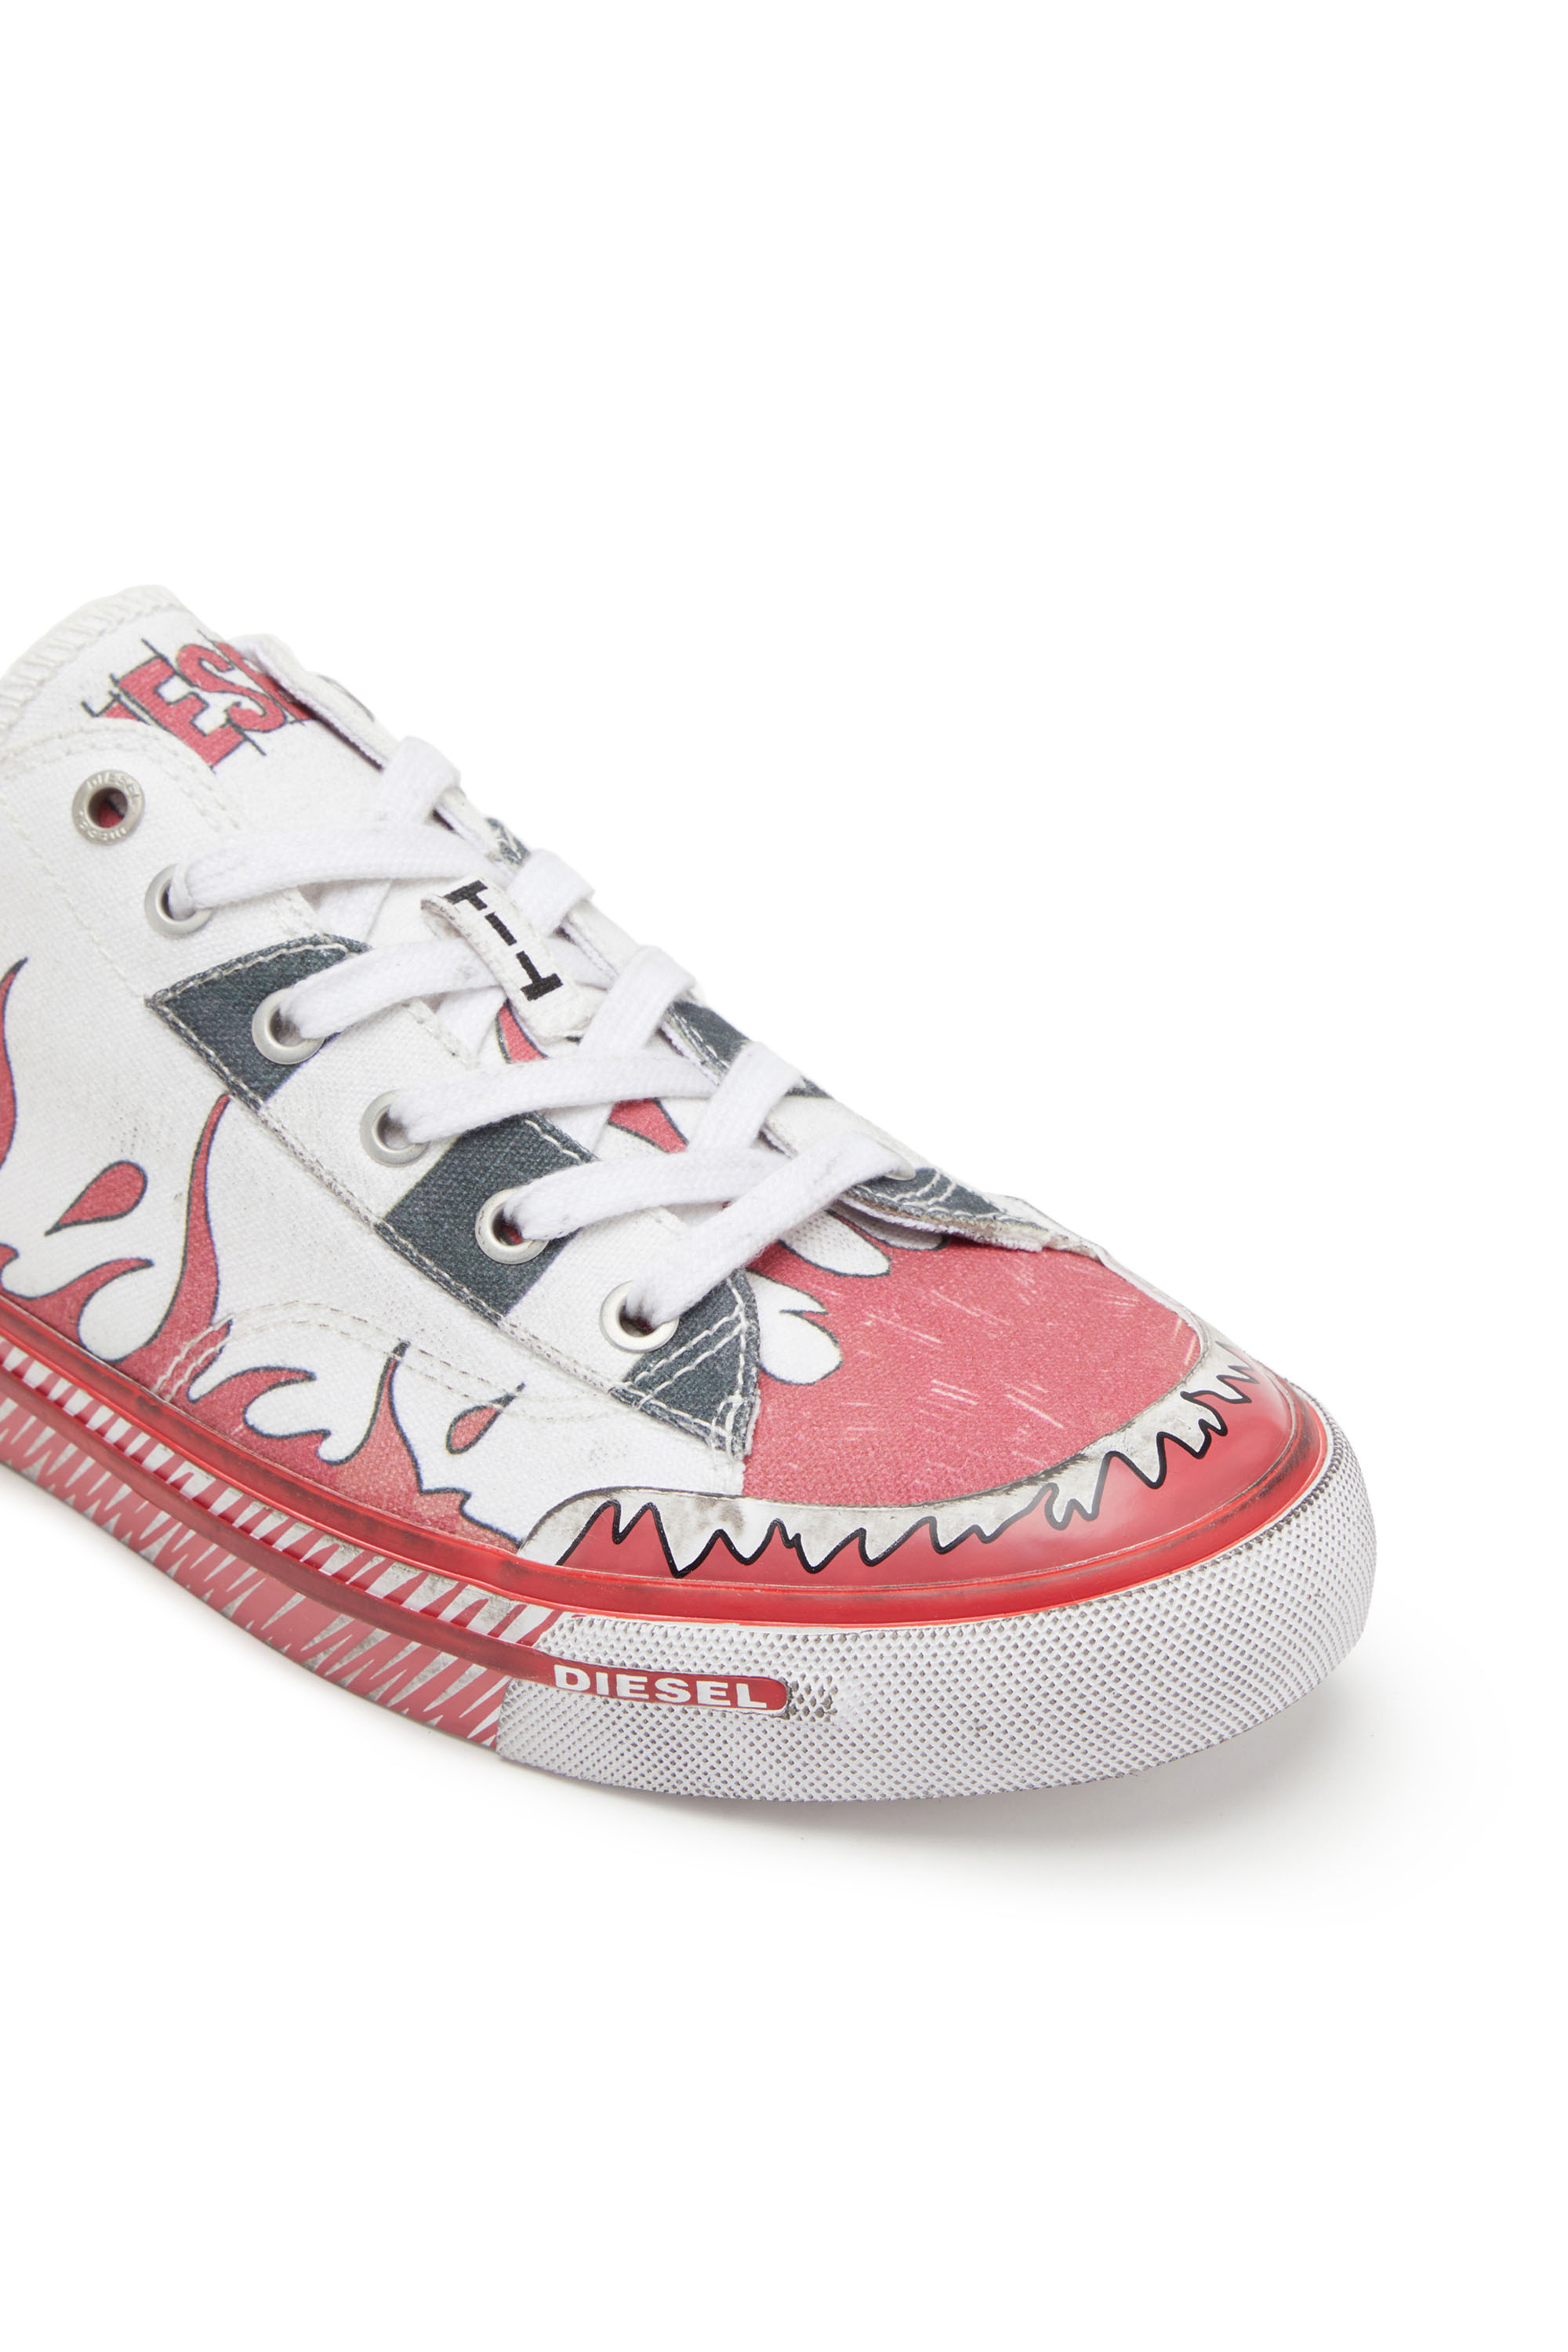 Diesel - S-ATHOS LOW, White/Red - Image 6